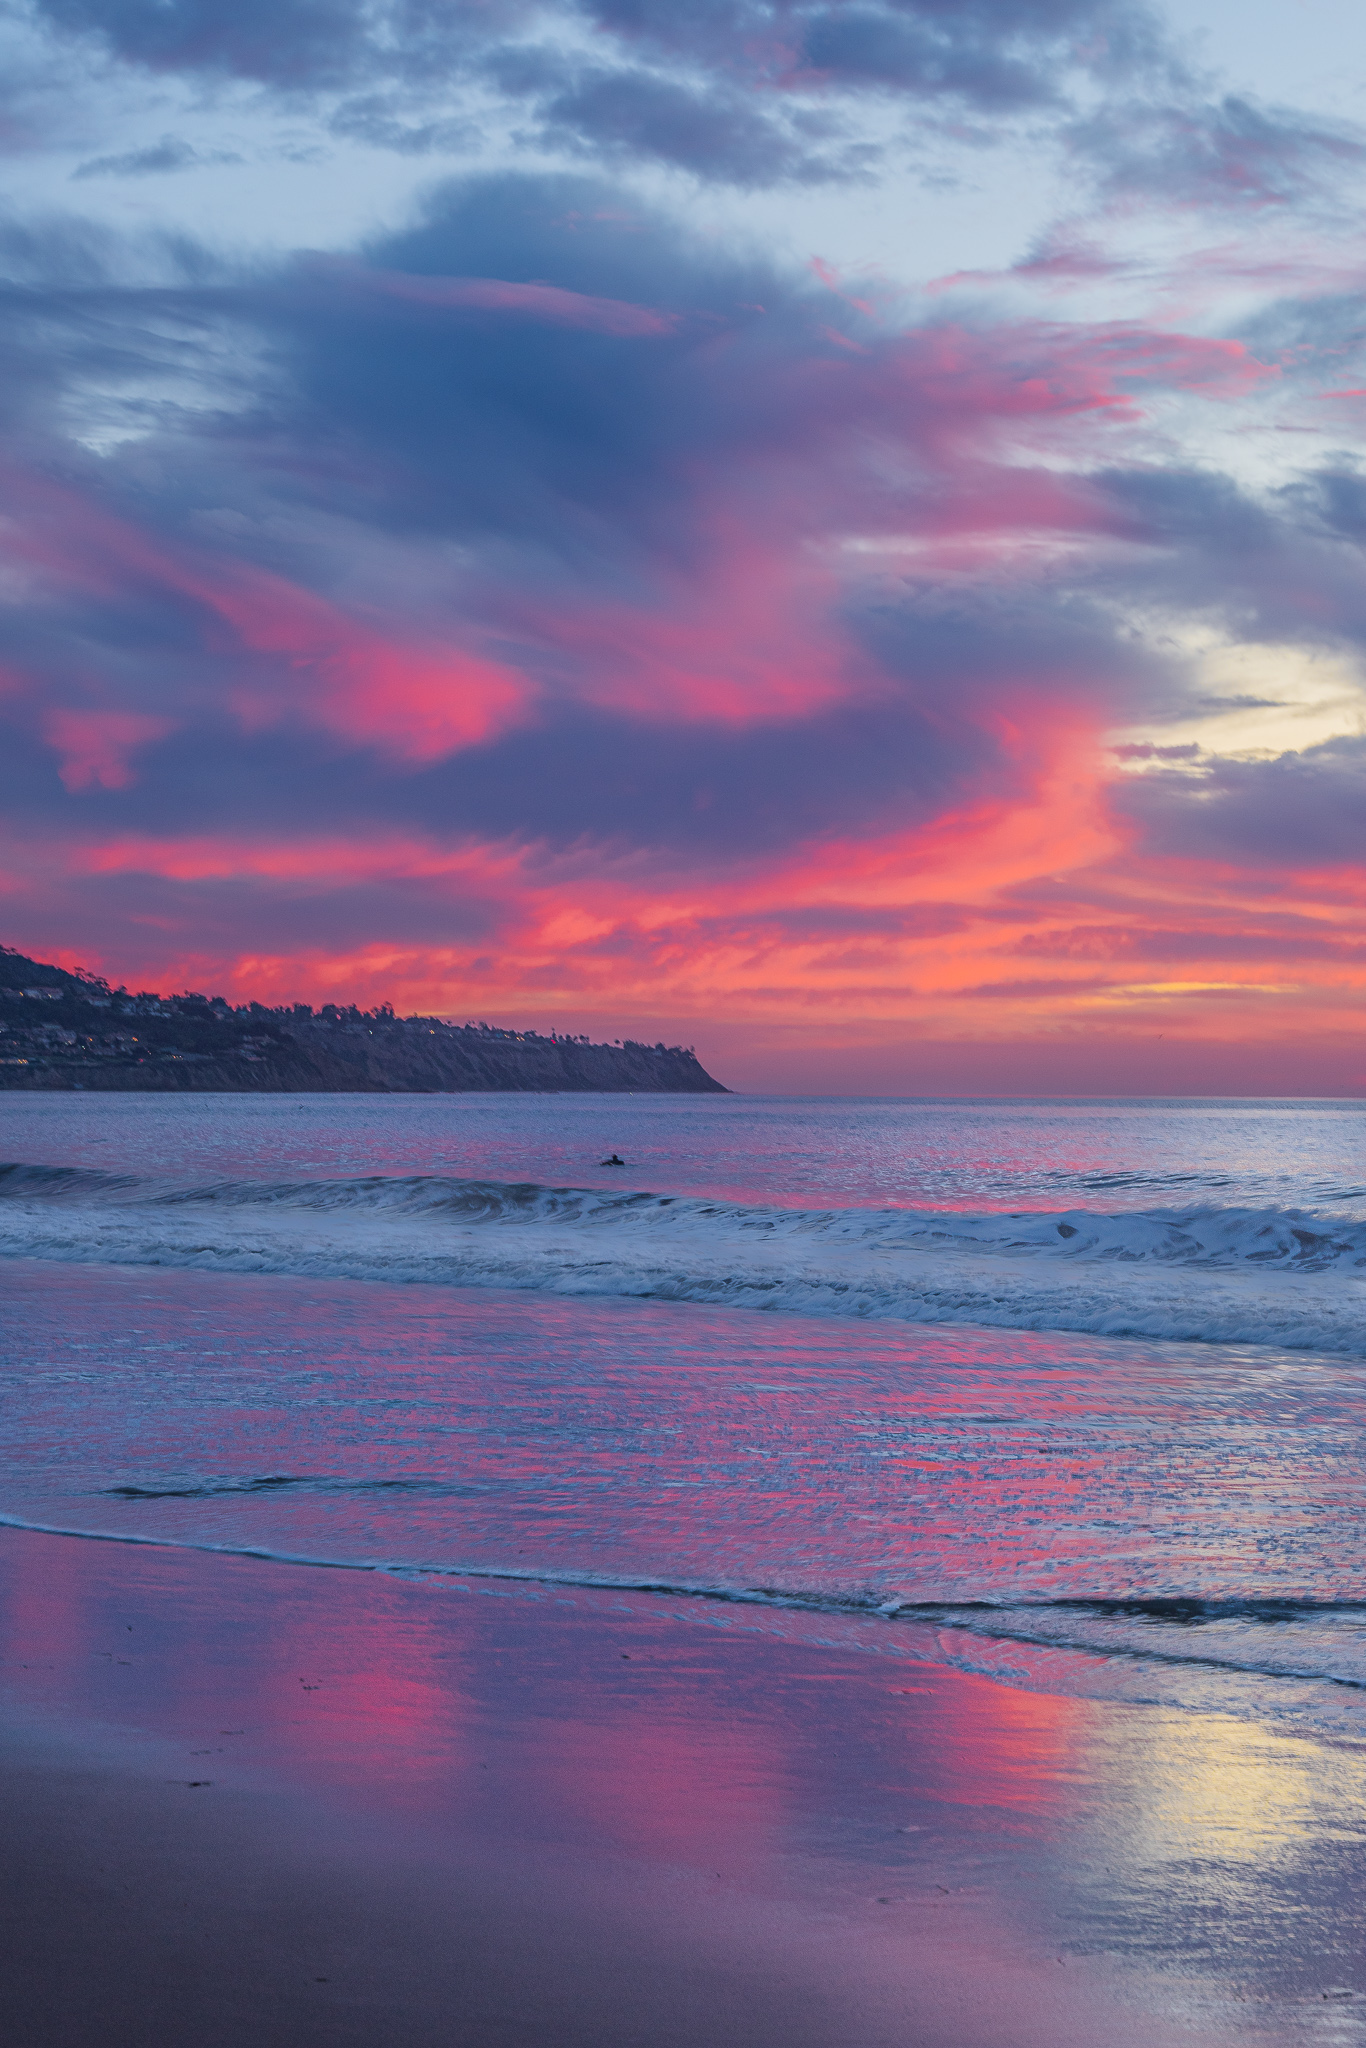 Cloudy and colorful winter sunset at The Burnout in Redondo Beach, California overlooking the hills of Palos Verdes